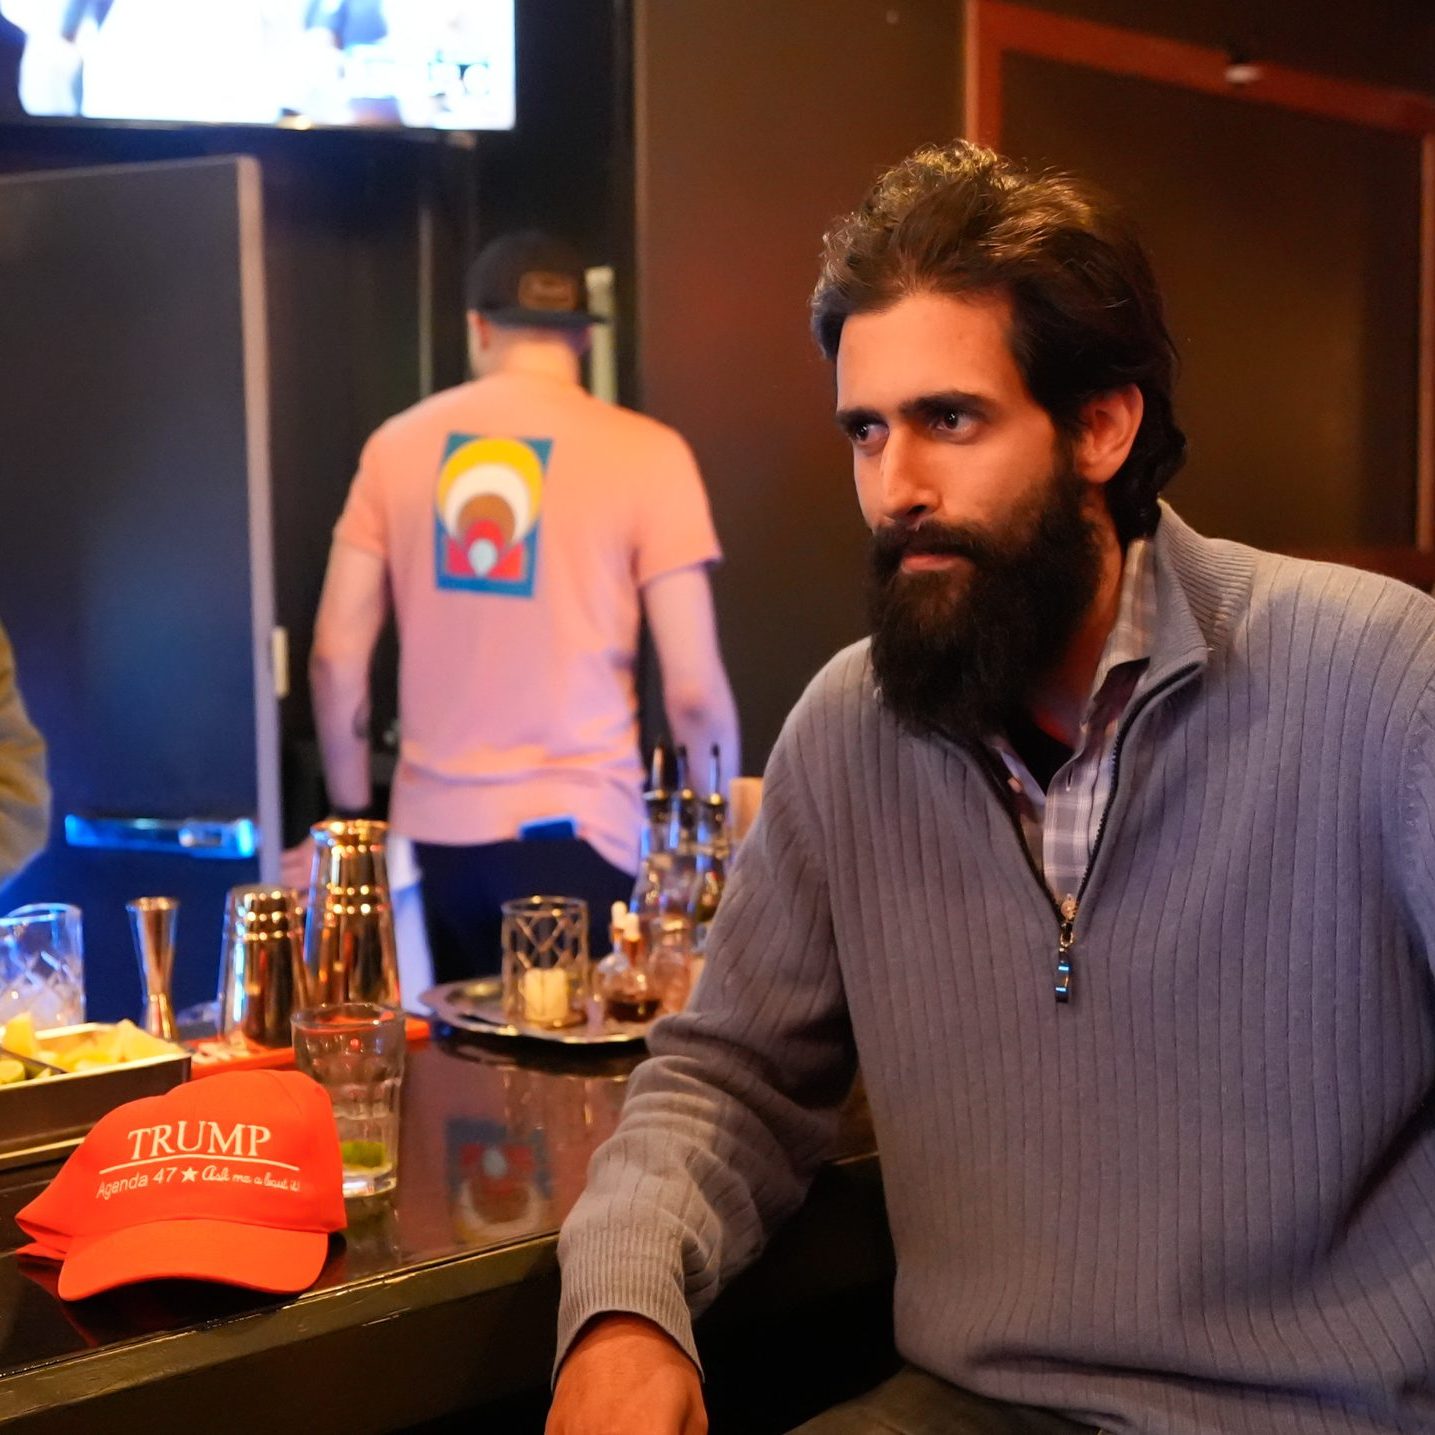 A man with a beard in a gray sweater is sitting at a bar counter, next to a red "Trump" hat. A bartender is preparing drinks and a TV is on in the background.